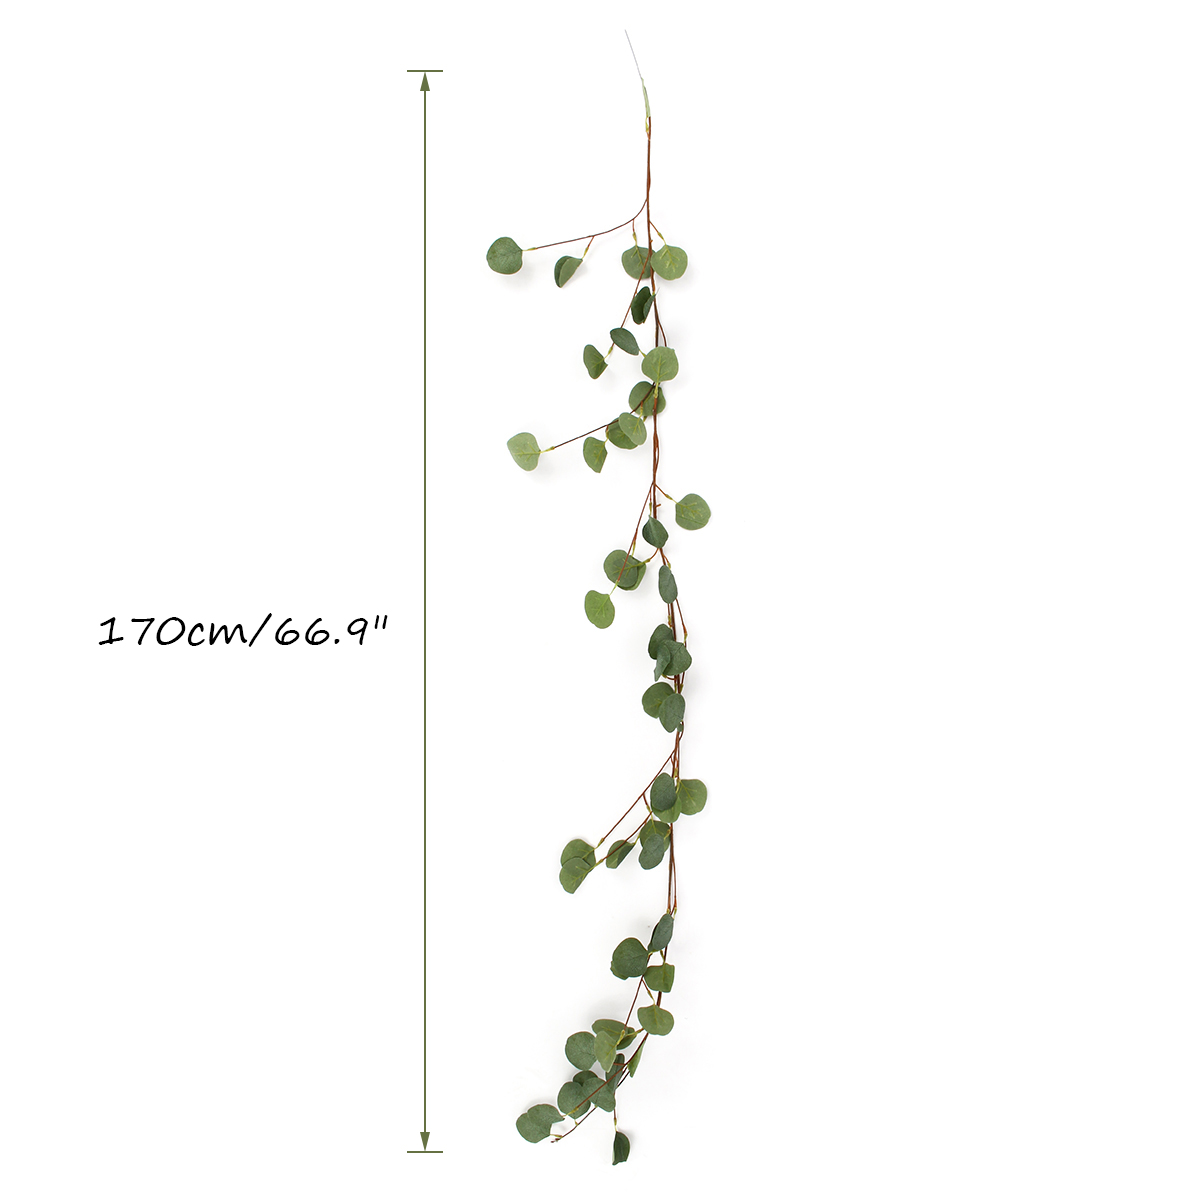 17m-Artificial-Eucalyptus-Leaves-Garland-Vine-Wedding-Greenery-for-Home-Wall-Decorations-1496148